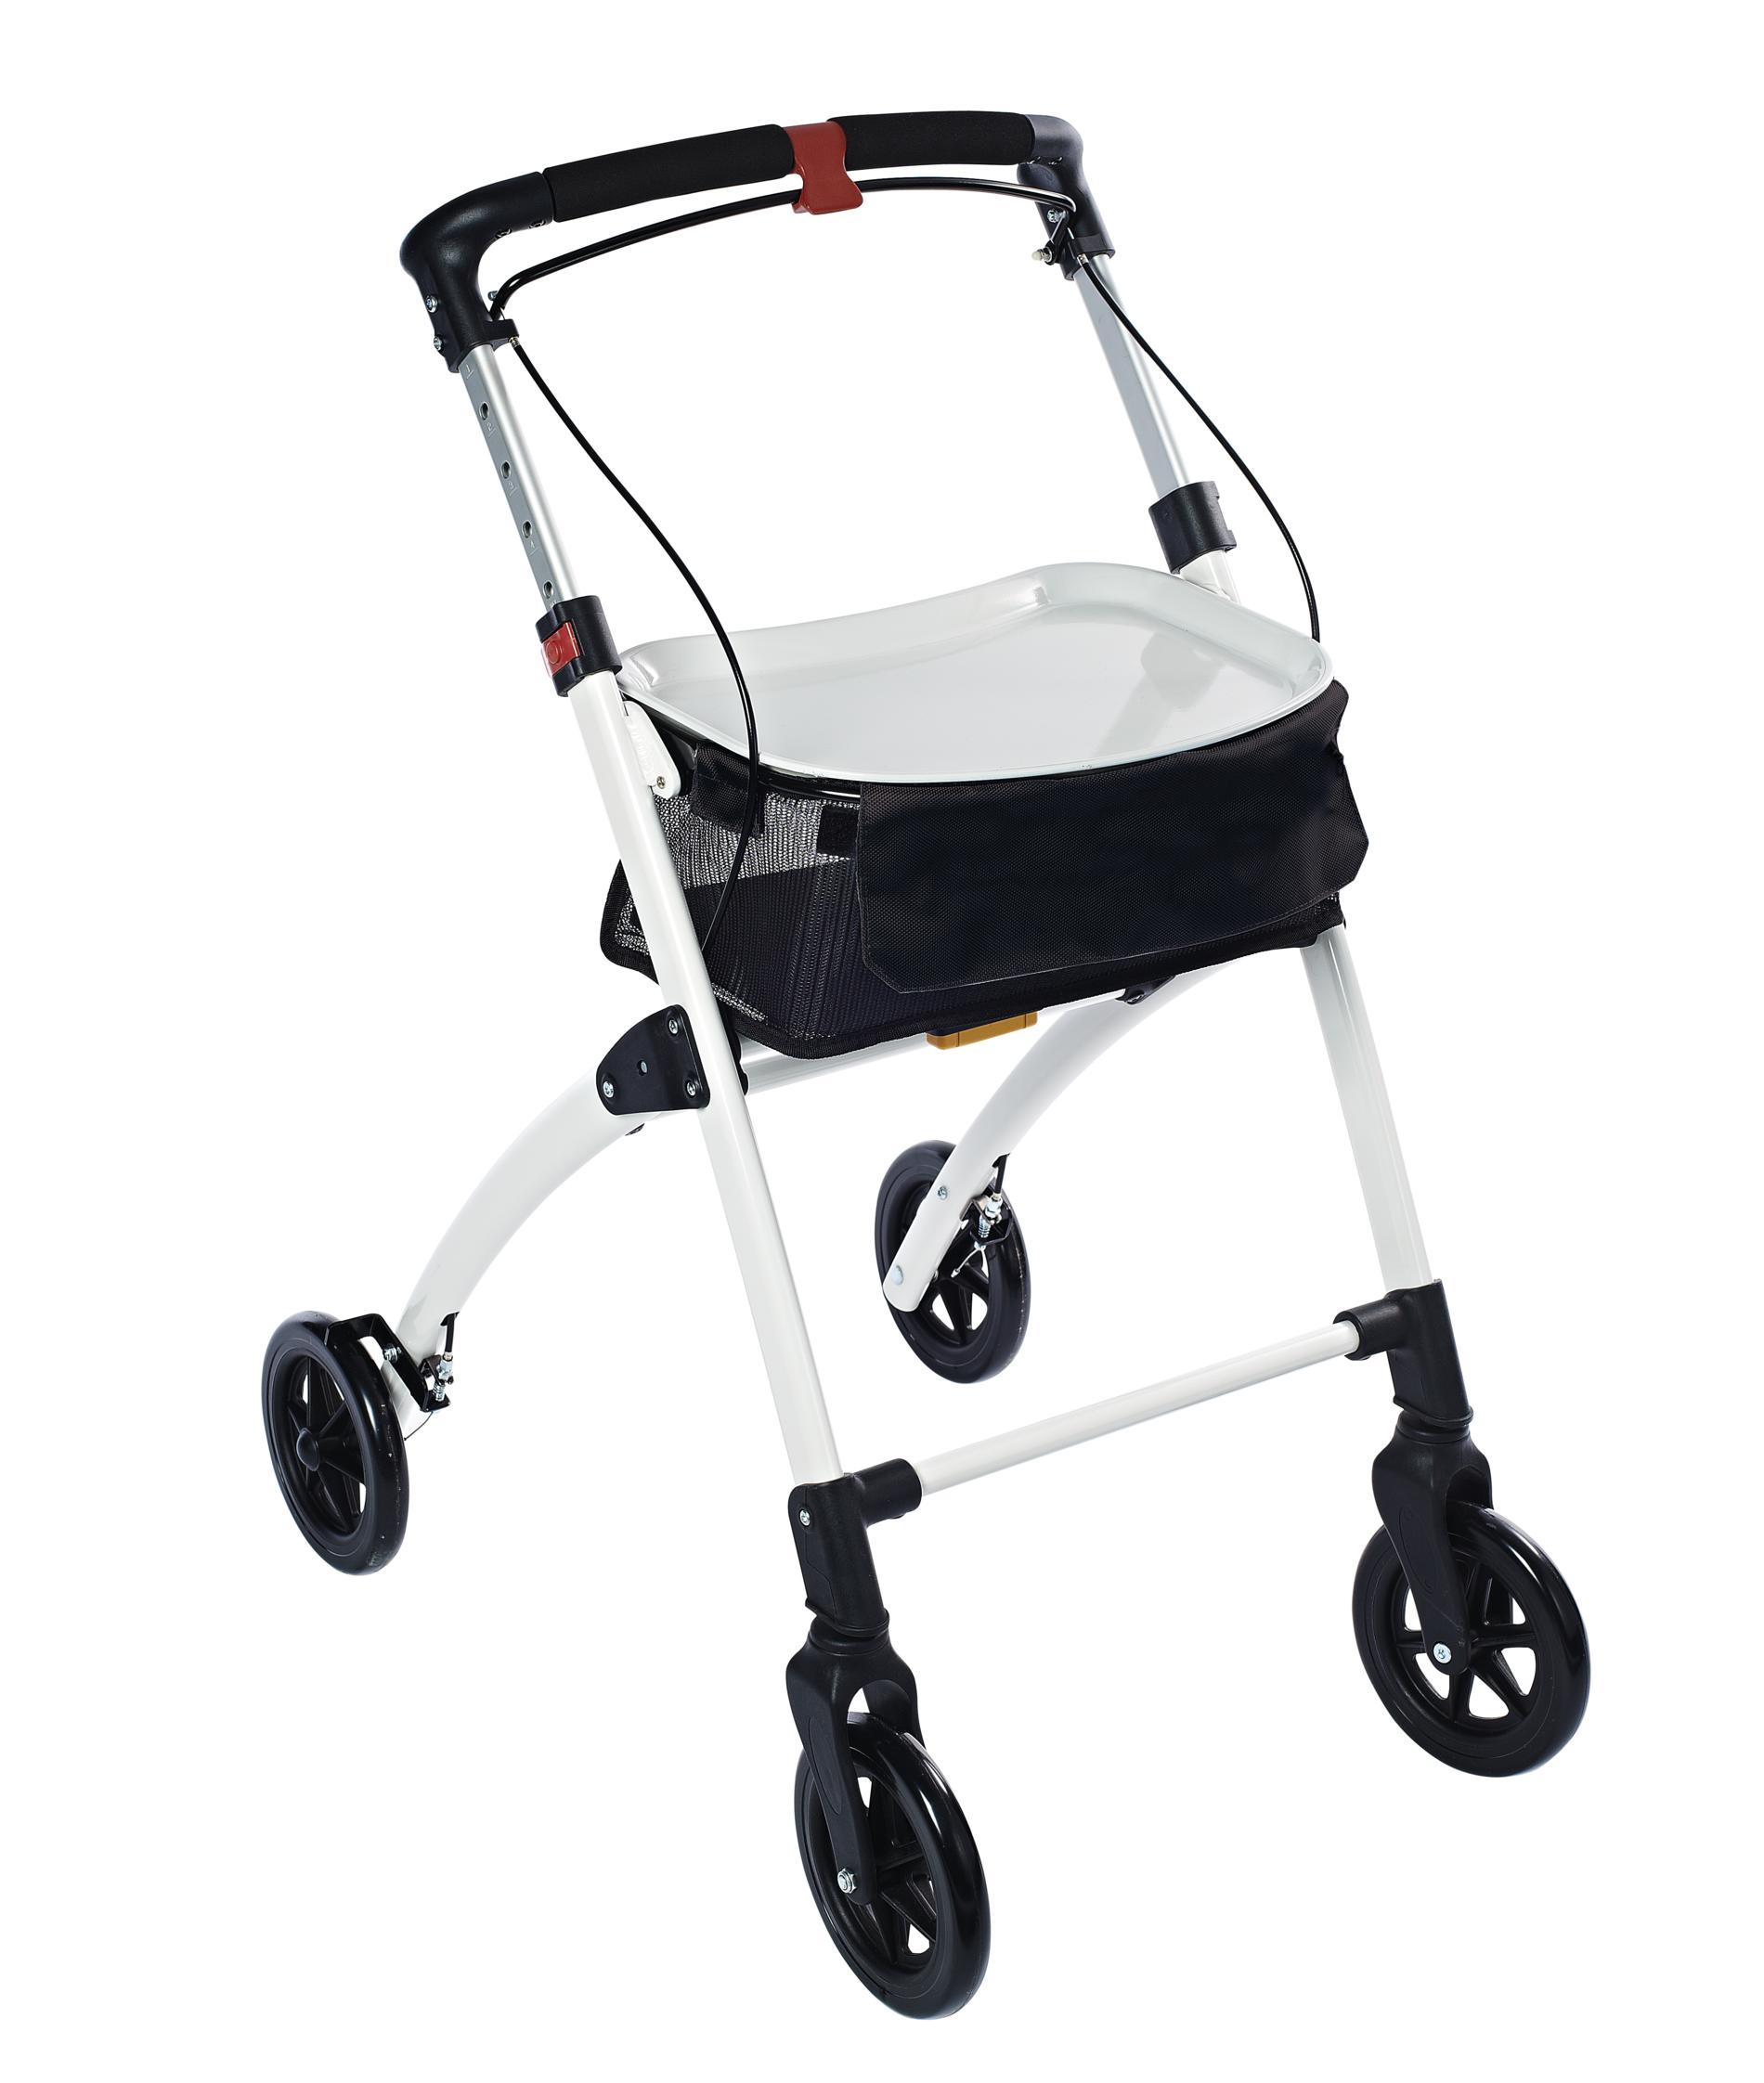 Ridder - everyday the with comfortable mobile rollator Online RIDDER at home Safe, Indoor and -